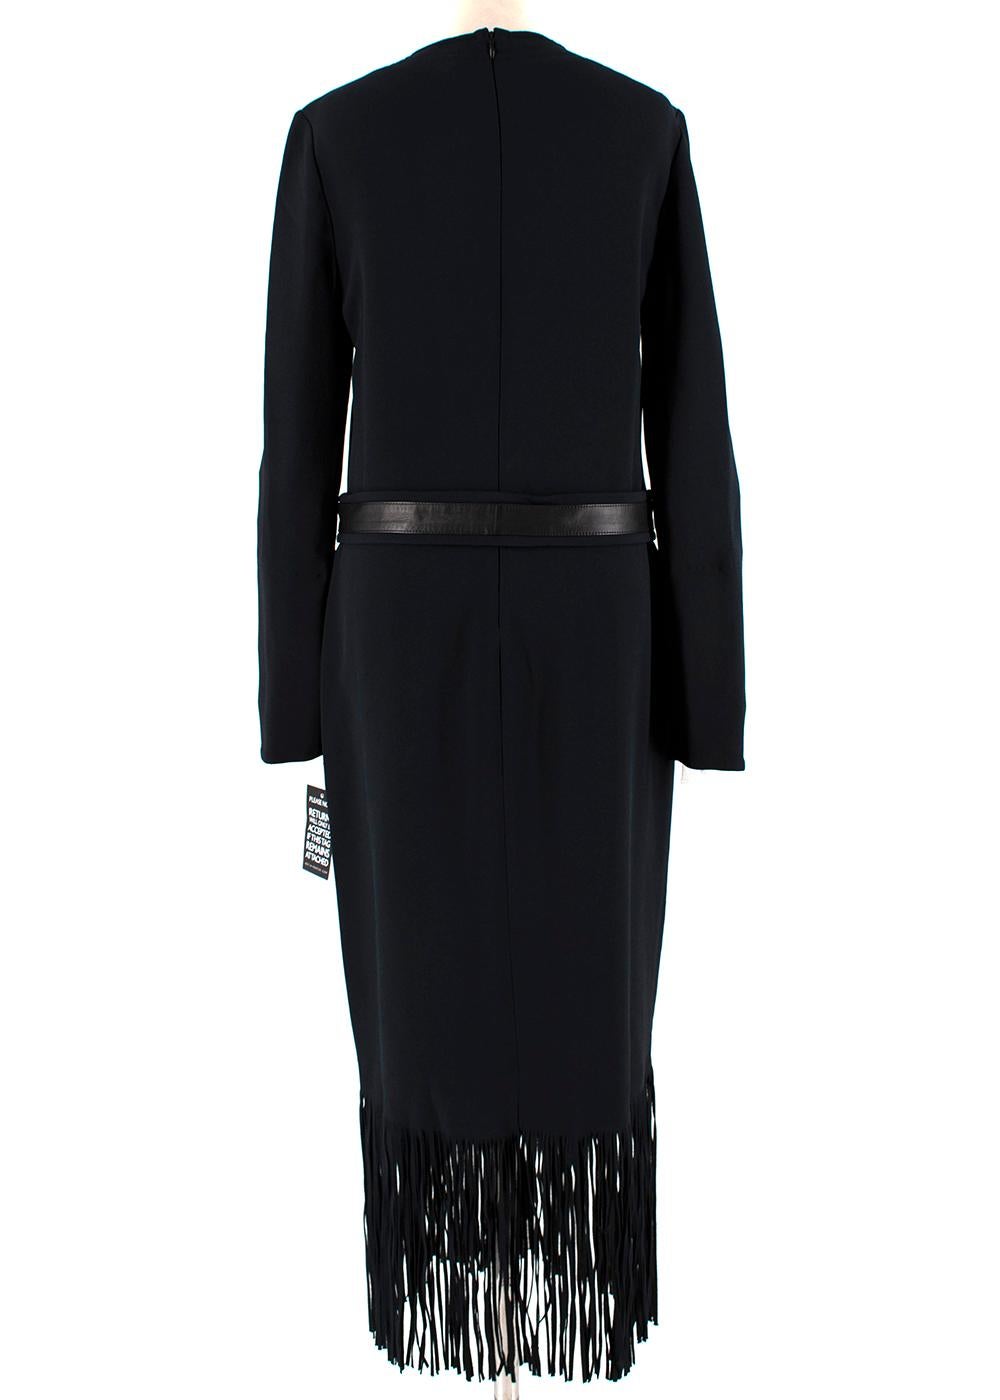 Tom Ford Black Long Fringed Dress with Leather Belt US8 In New Condition For Sale In London, GB